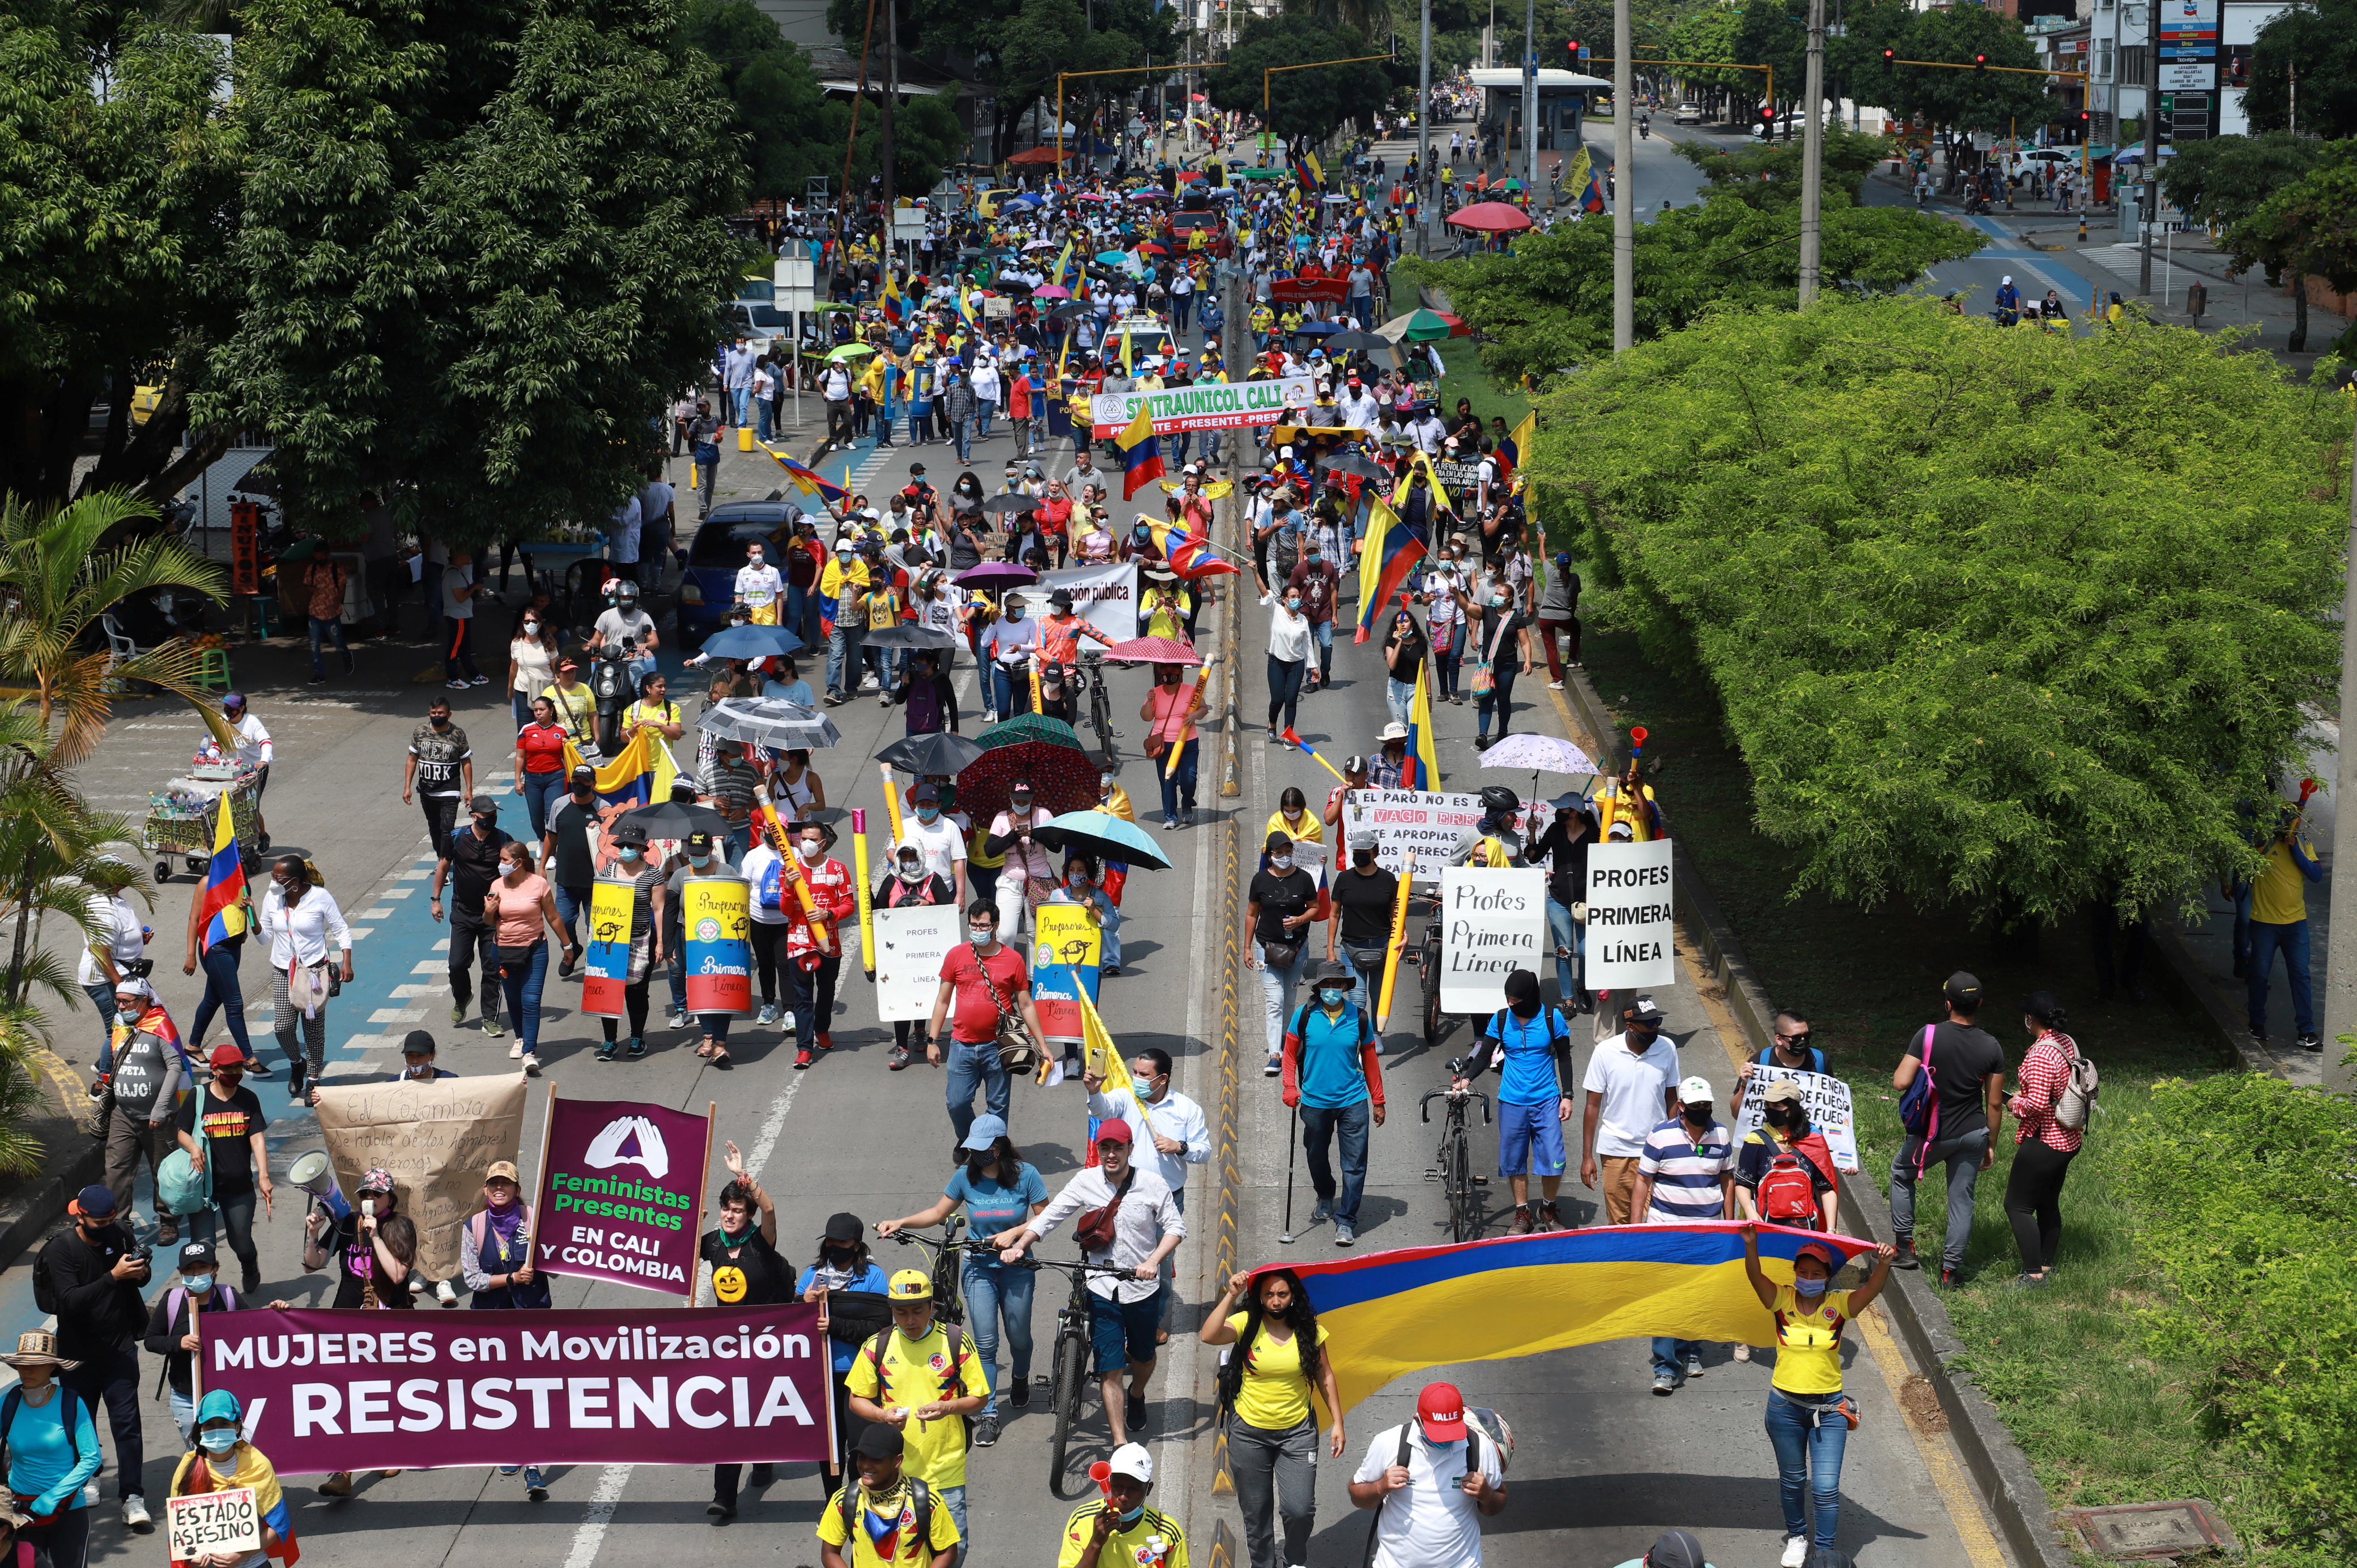 Demonstrators march during a protest demanding government action to tackle poverty, police violence and inequalities in healthcare and education systems, in Cali, Colombia June 2, 2021. REUTERS/Juan B Diaz   NO RESALES. NO ARCHIVES